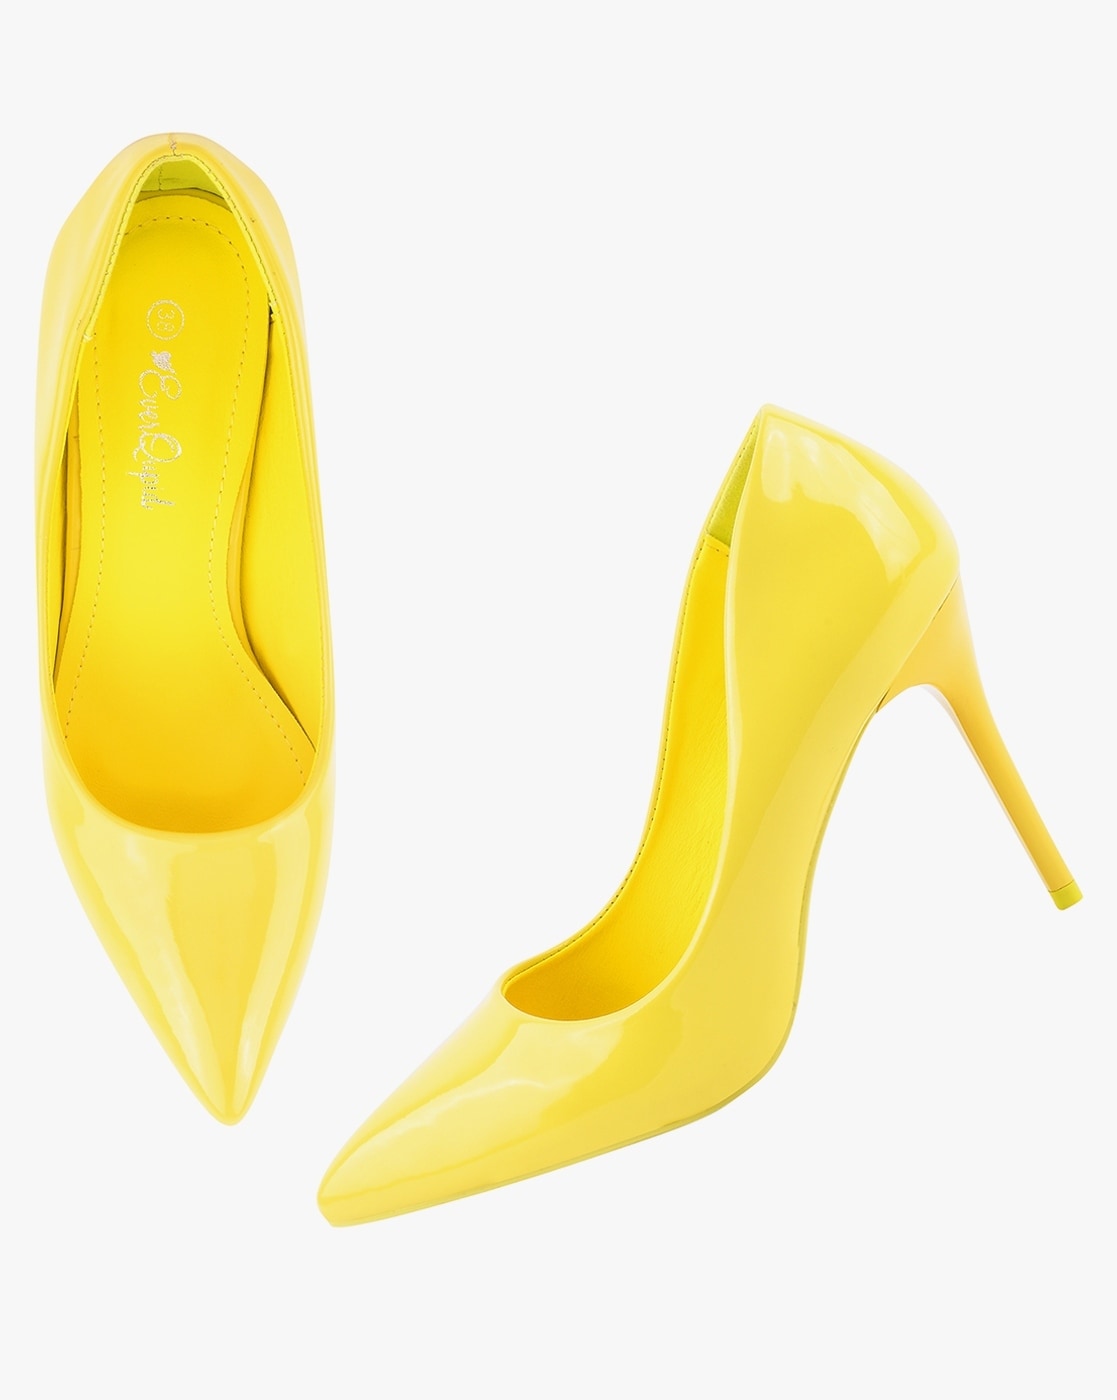 Sporty Kate - 85 mm Pumps - Nappa leather - Yellow Queen - Women -  Christian Louboutin United States